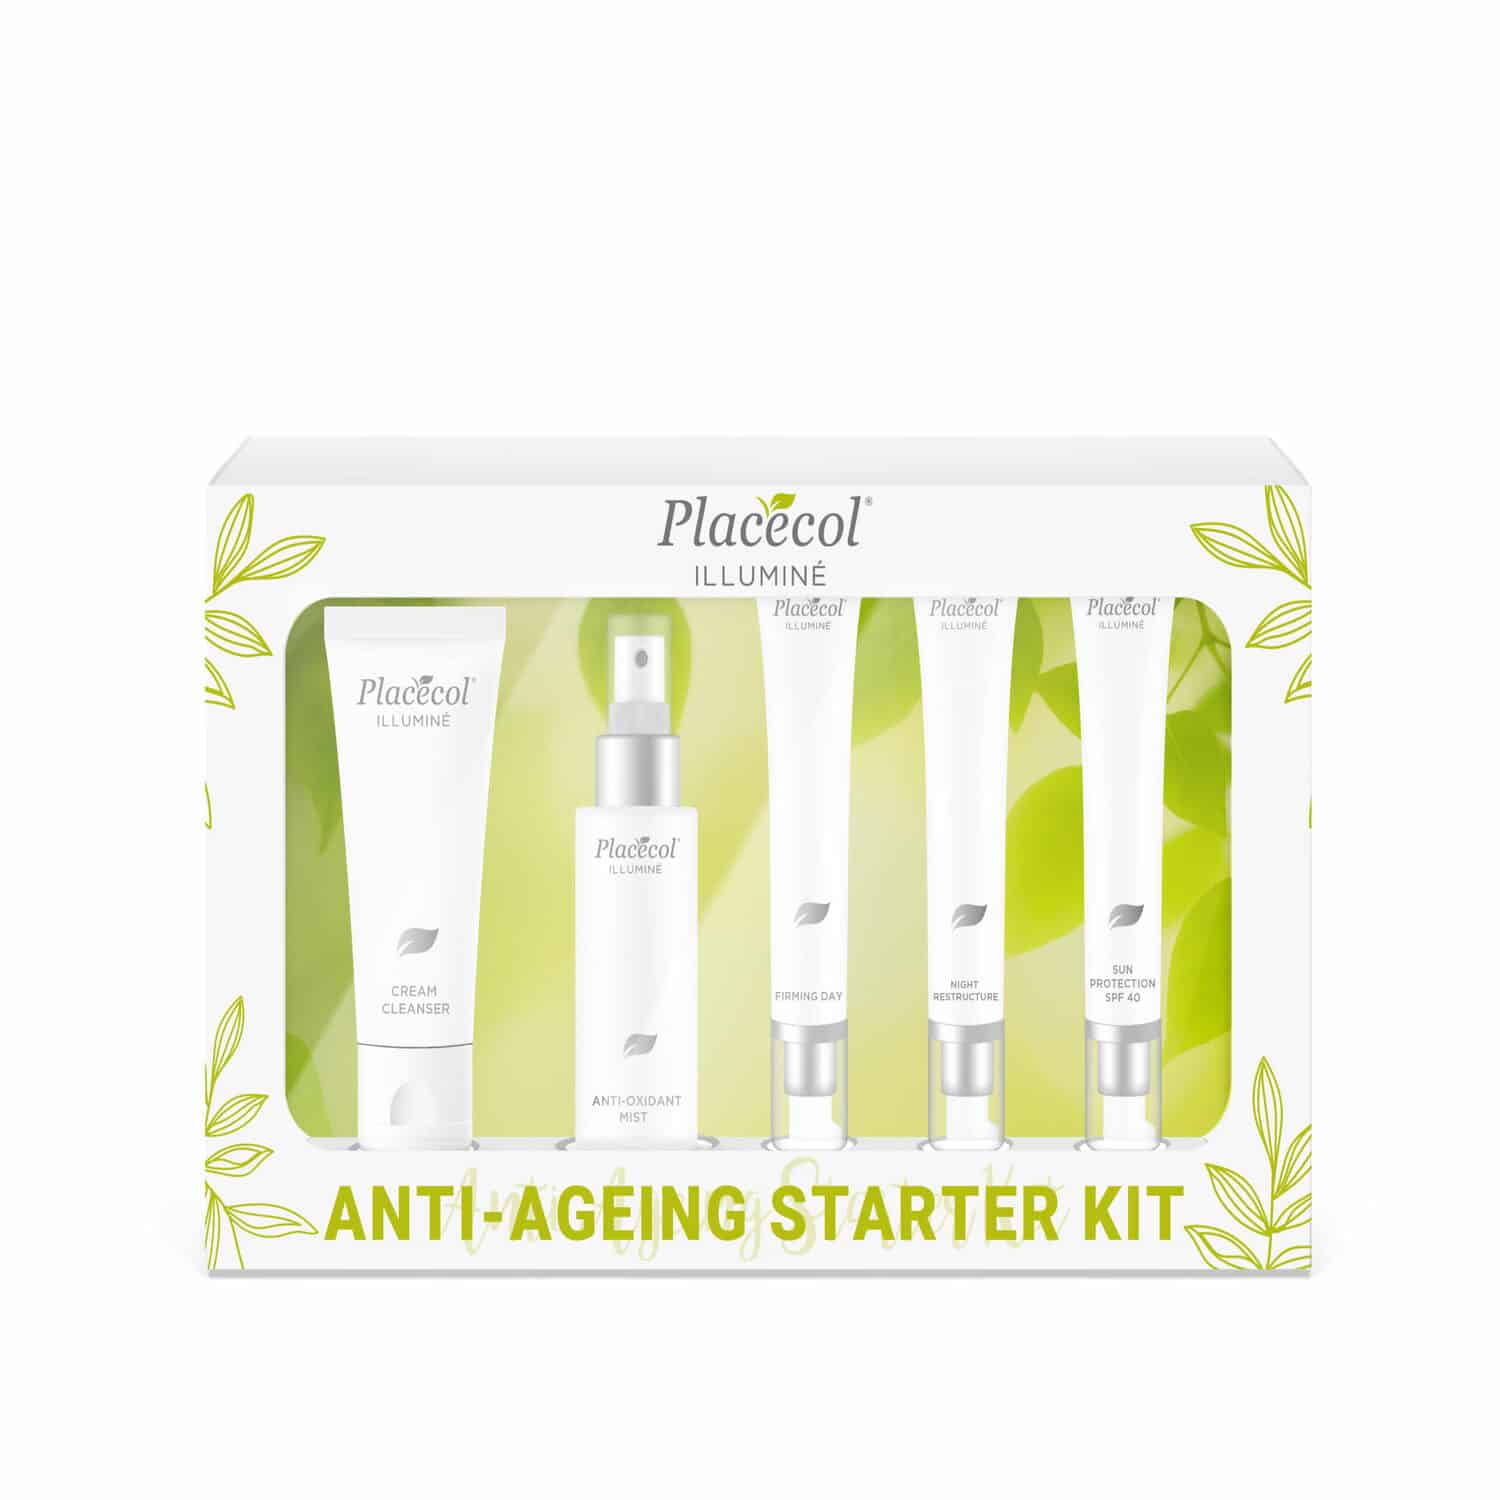 Placcecol Anti-Ageing Starter Kit